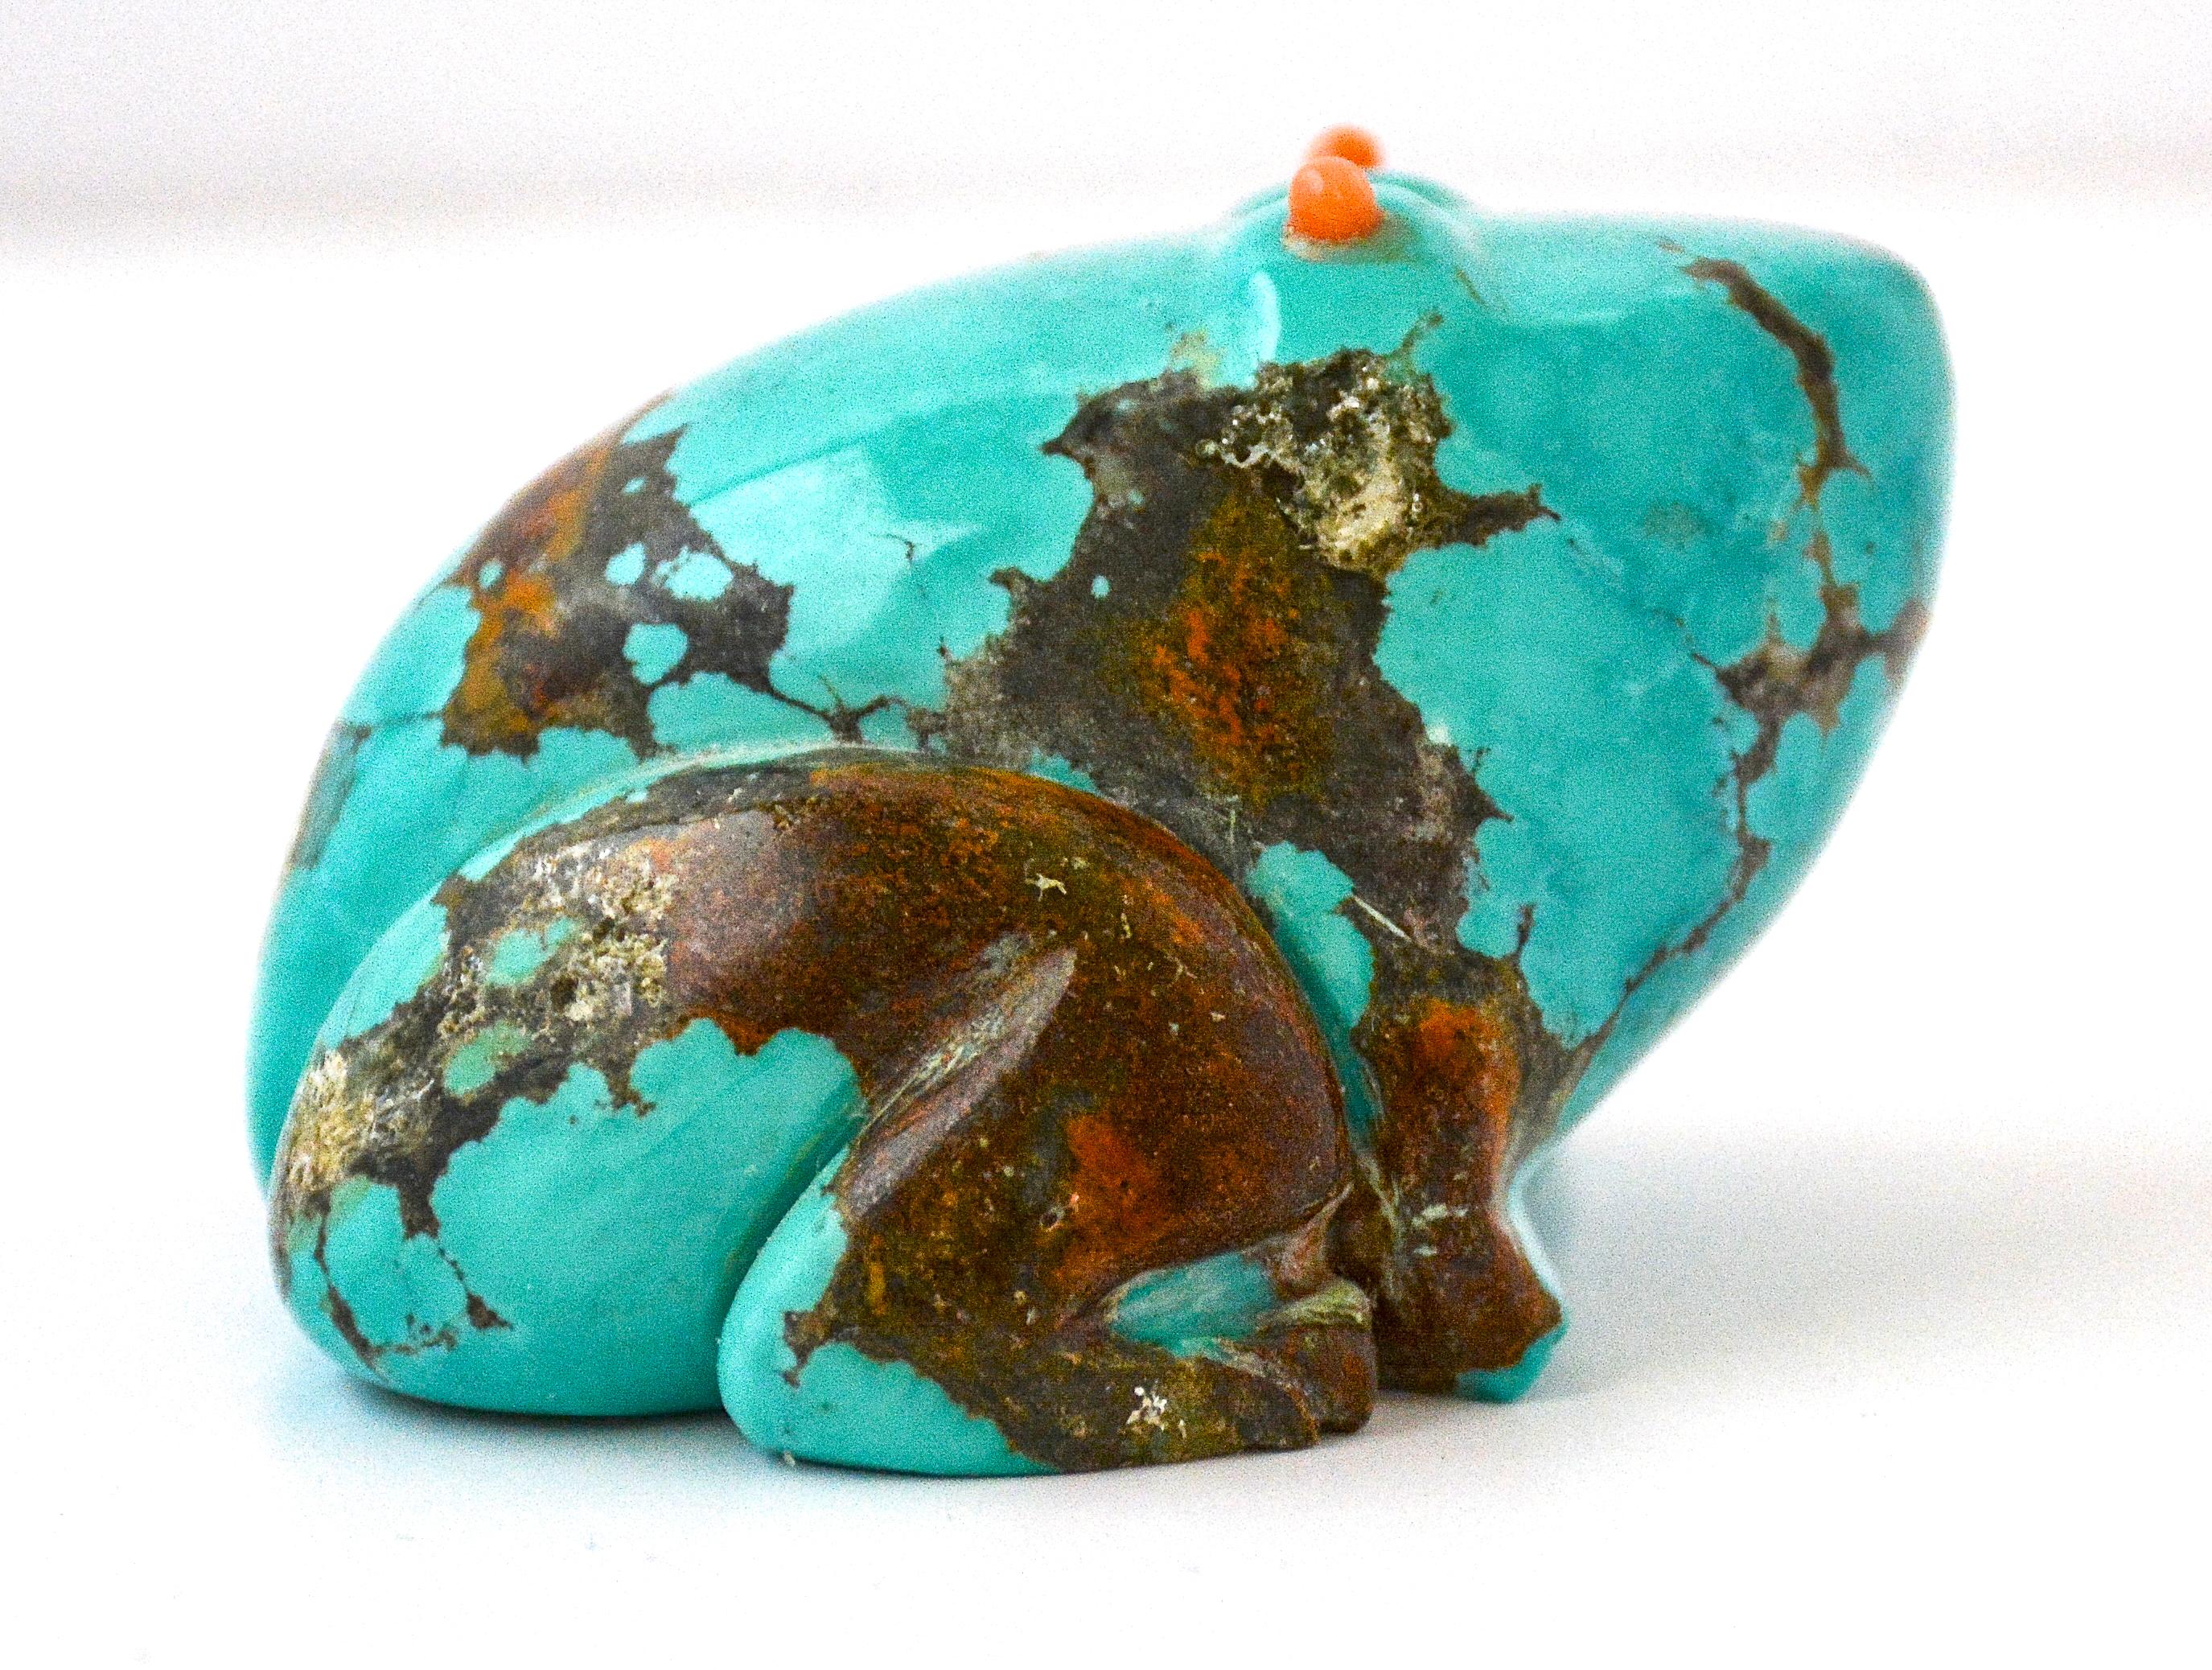 Frog Fetish
Turquoise and coral 
Sarah Pino
1990
Measures: 1.75 inches H. x 2.50 inches L. x 2.25 inches W.


This wonderful frog fetish was carved from a single piece of turquoise by Navajo carver Sarah Pino in 1990. It is in perfect